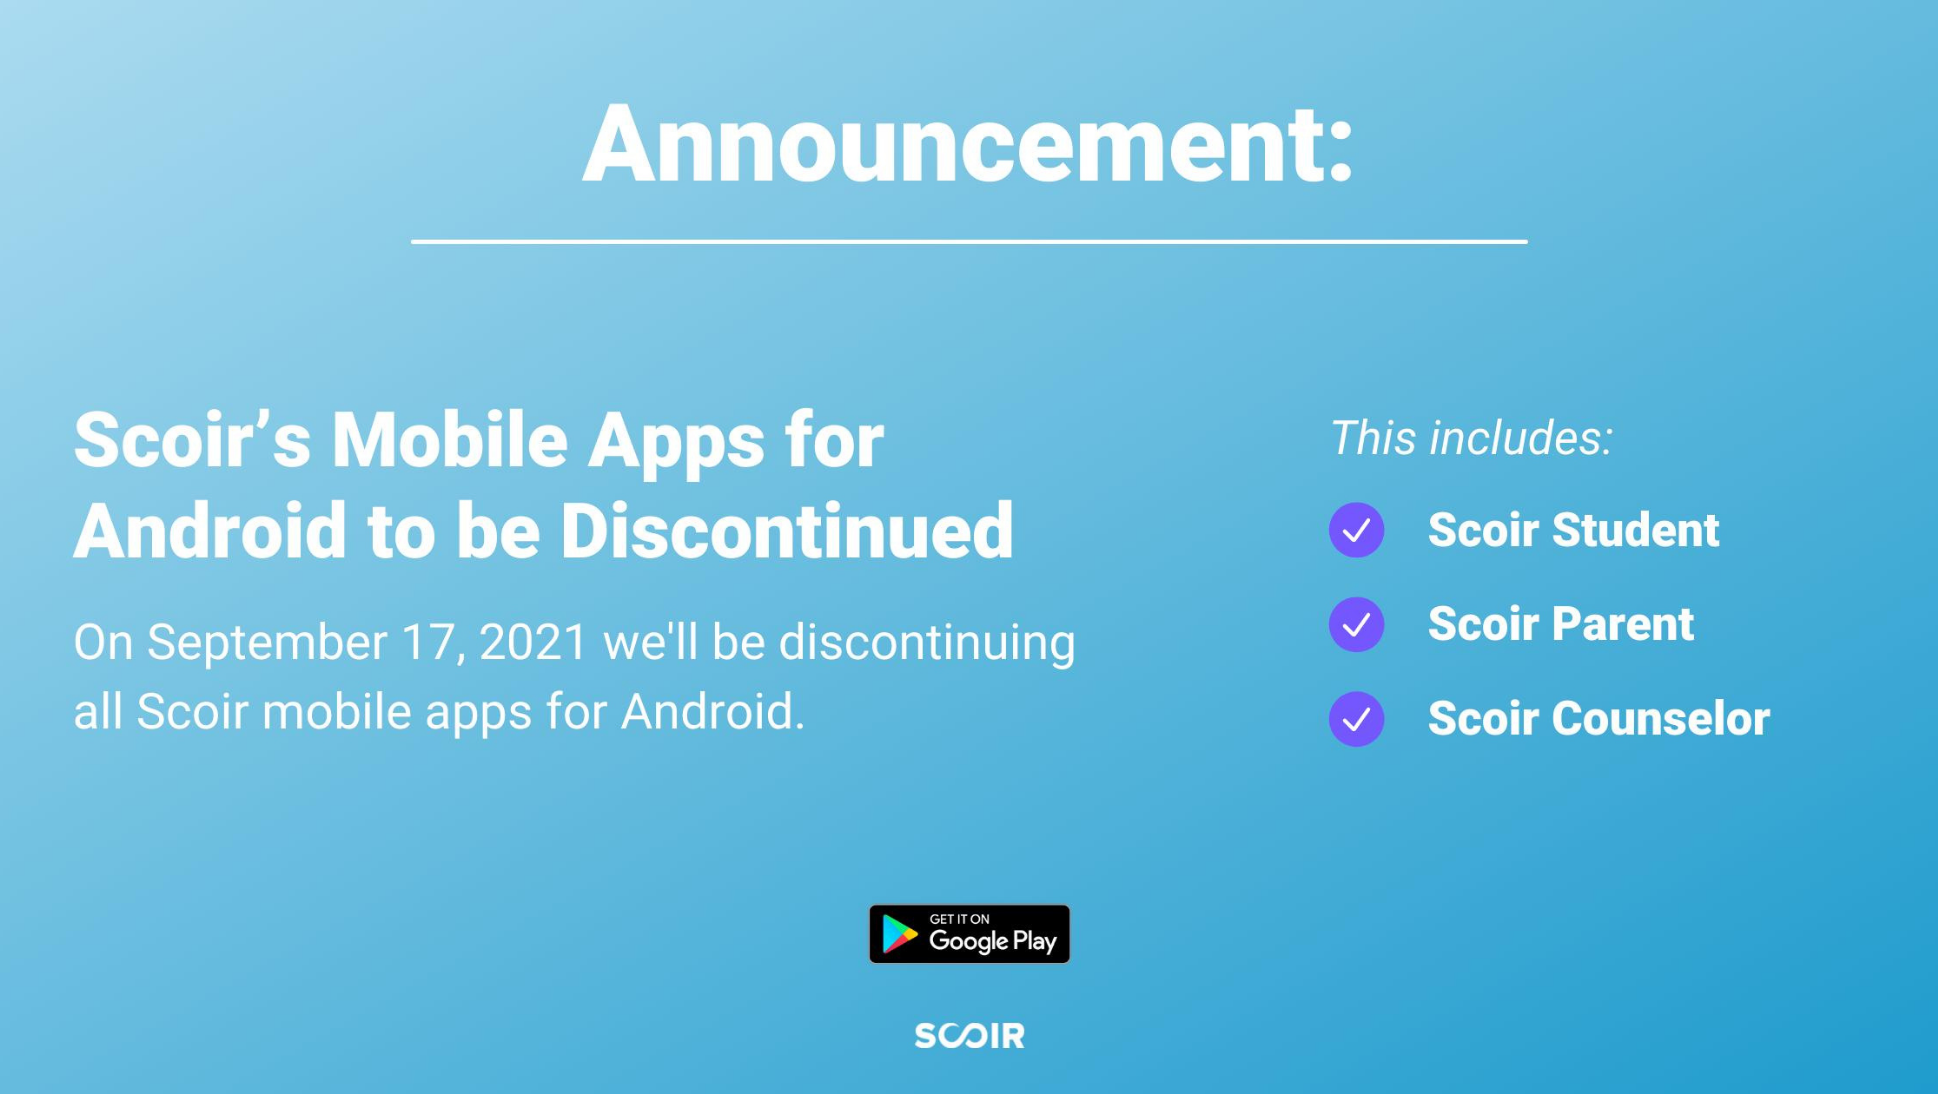 Announcement: Scoir's Mobile Apps for Android to be Discontinued